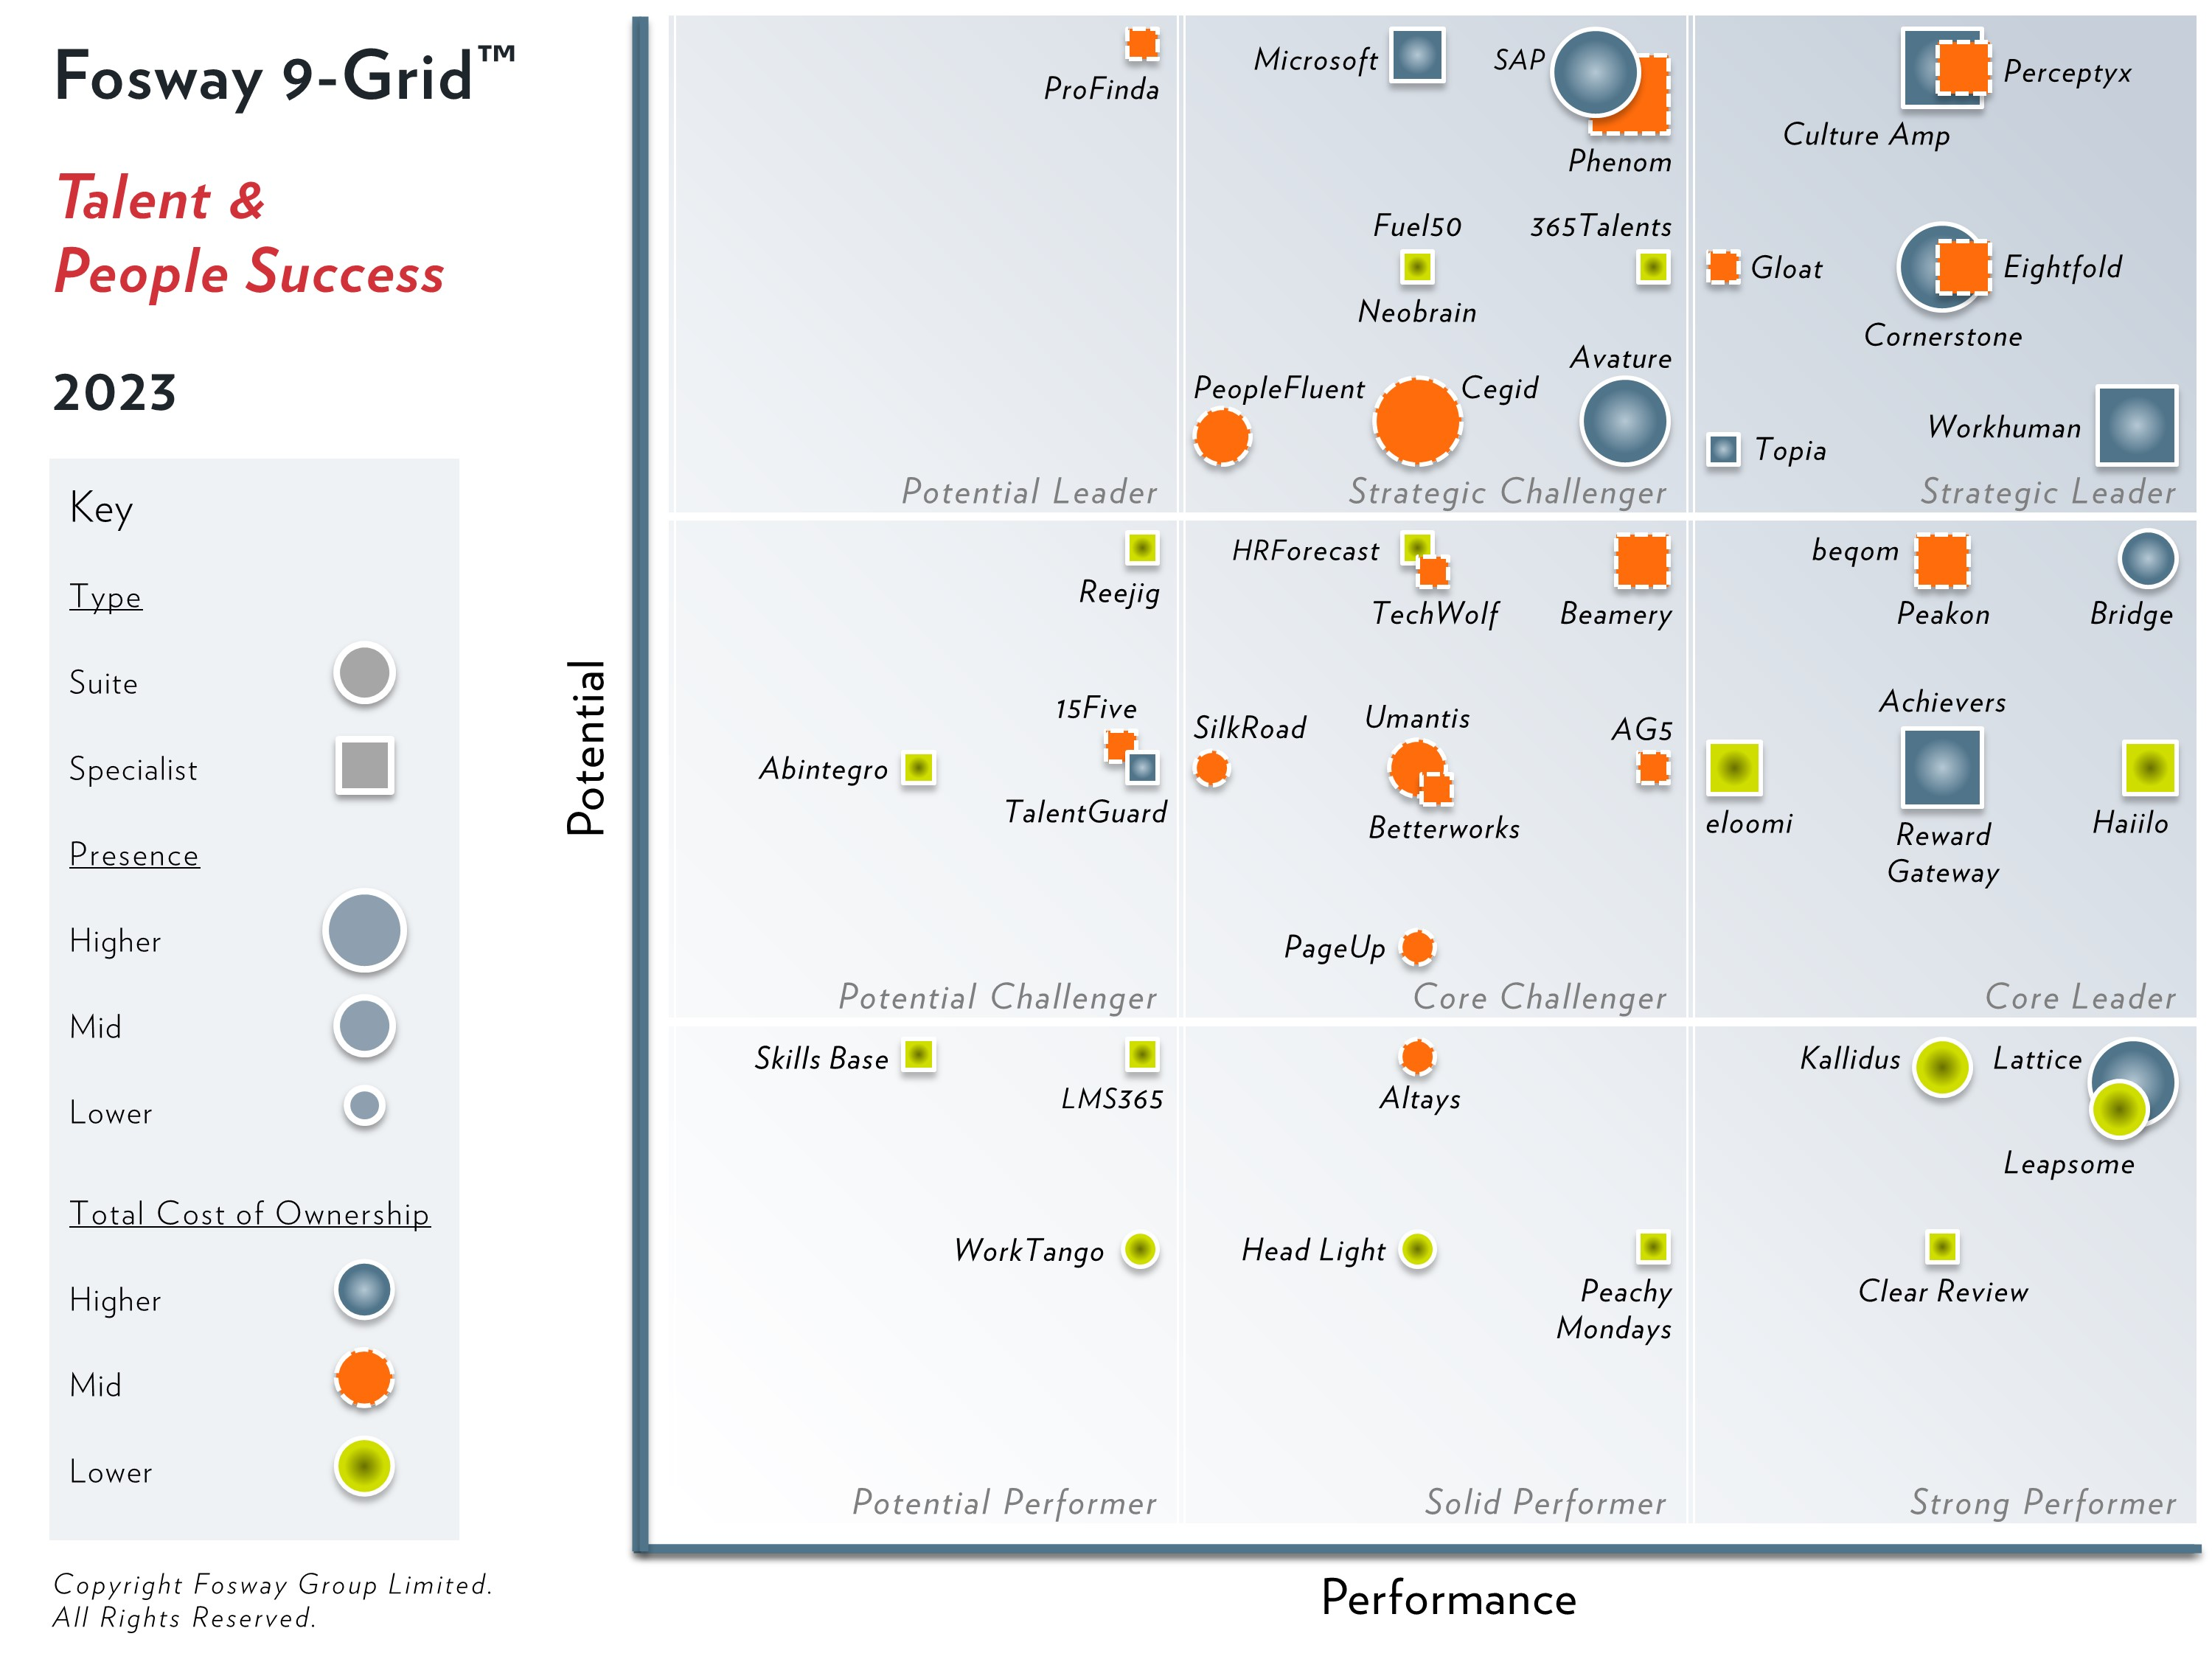 Image of the Fosway 9-Grid™ Talent & People Success 2023, indicating PeopleFluent as a Strategic Challenger.